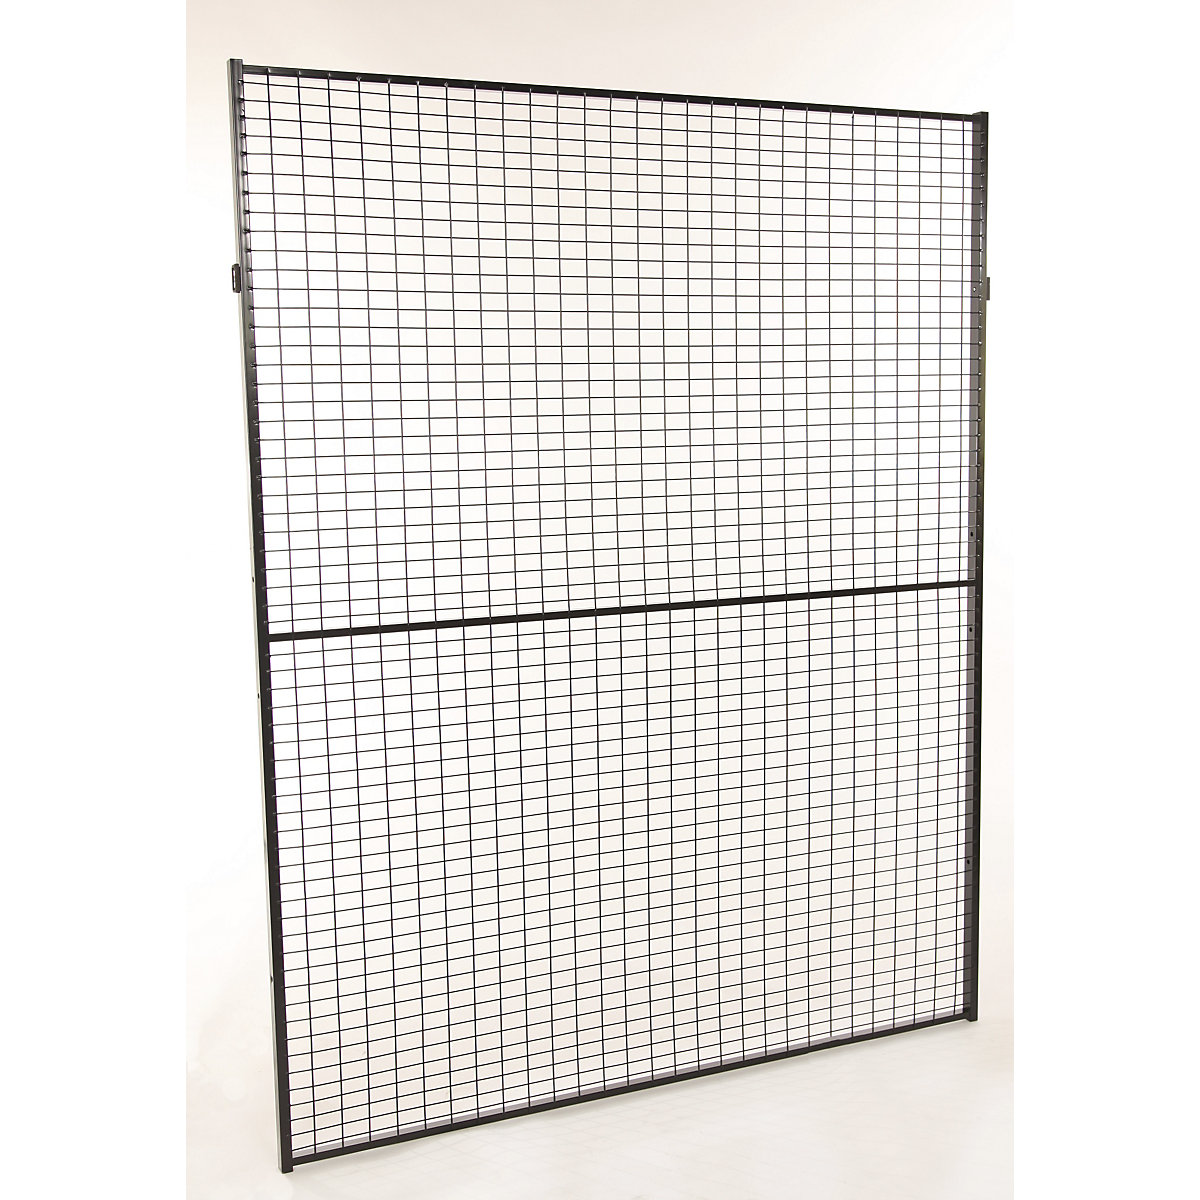 X-GUARD CLASSIC machine protective fencing, wall section – Axelent, height 2200 mm, width 1400 mm-9